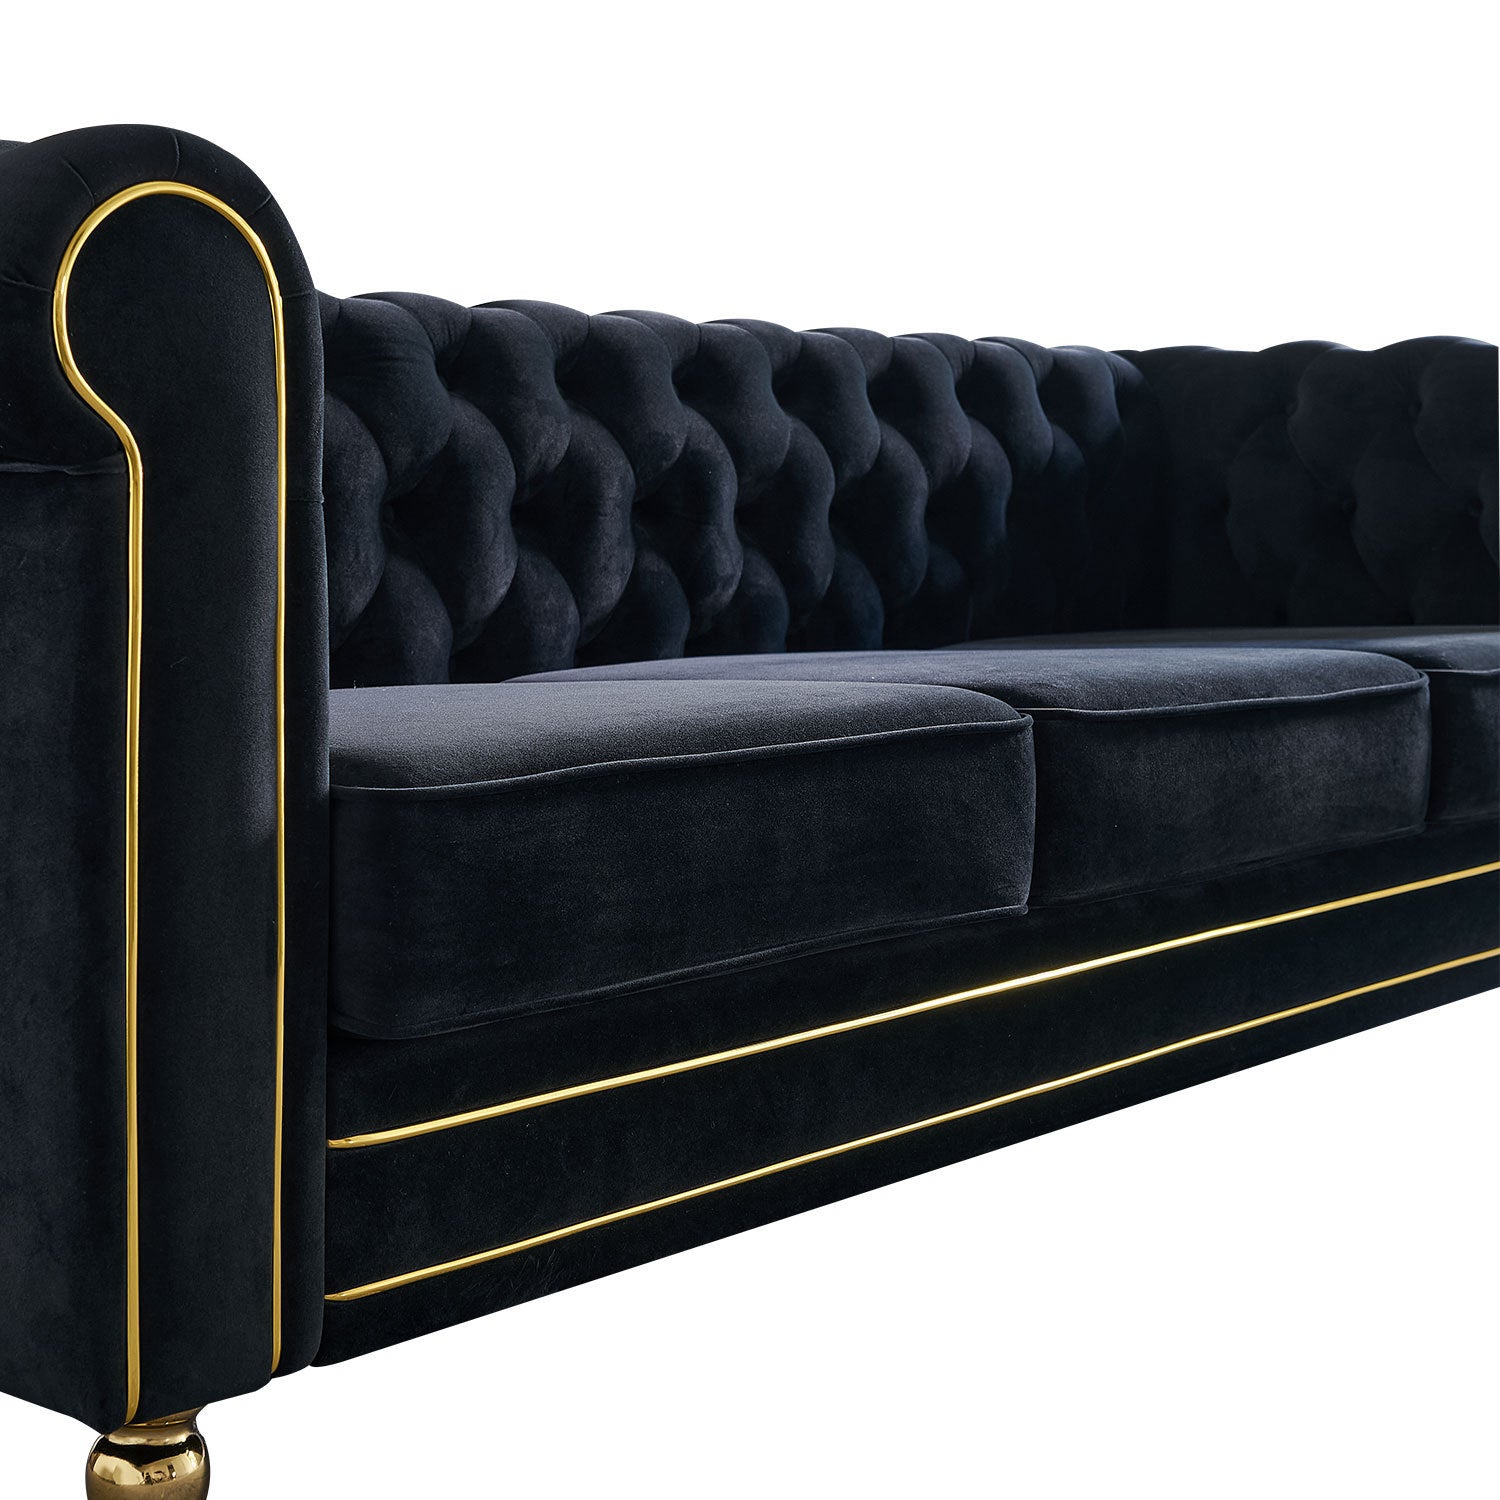 84" Black Velvet Chesterfield Sofa With Gold Trim and Metal legs